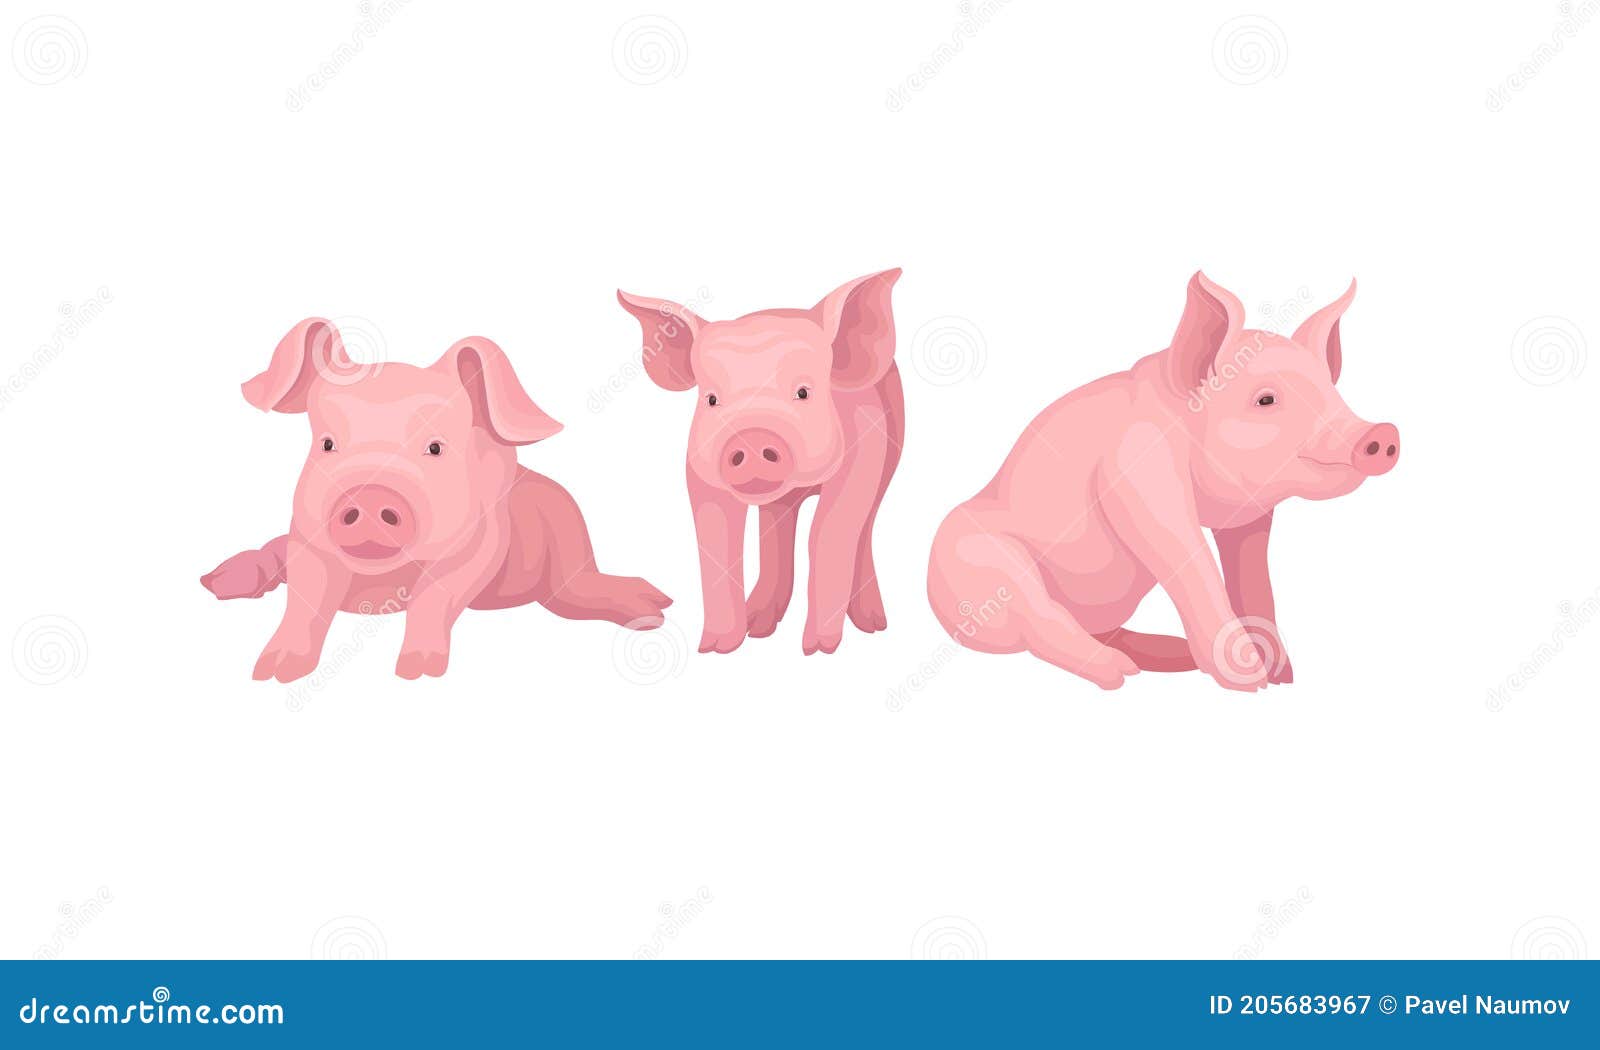 pink pig as even-toed ungulate domestic animal in different poses  set